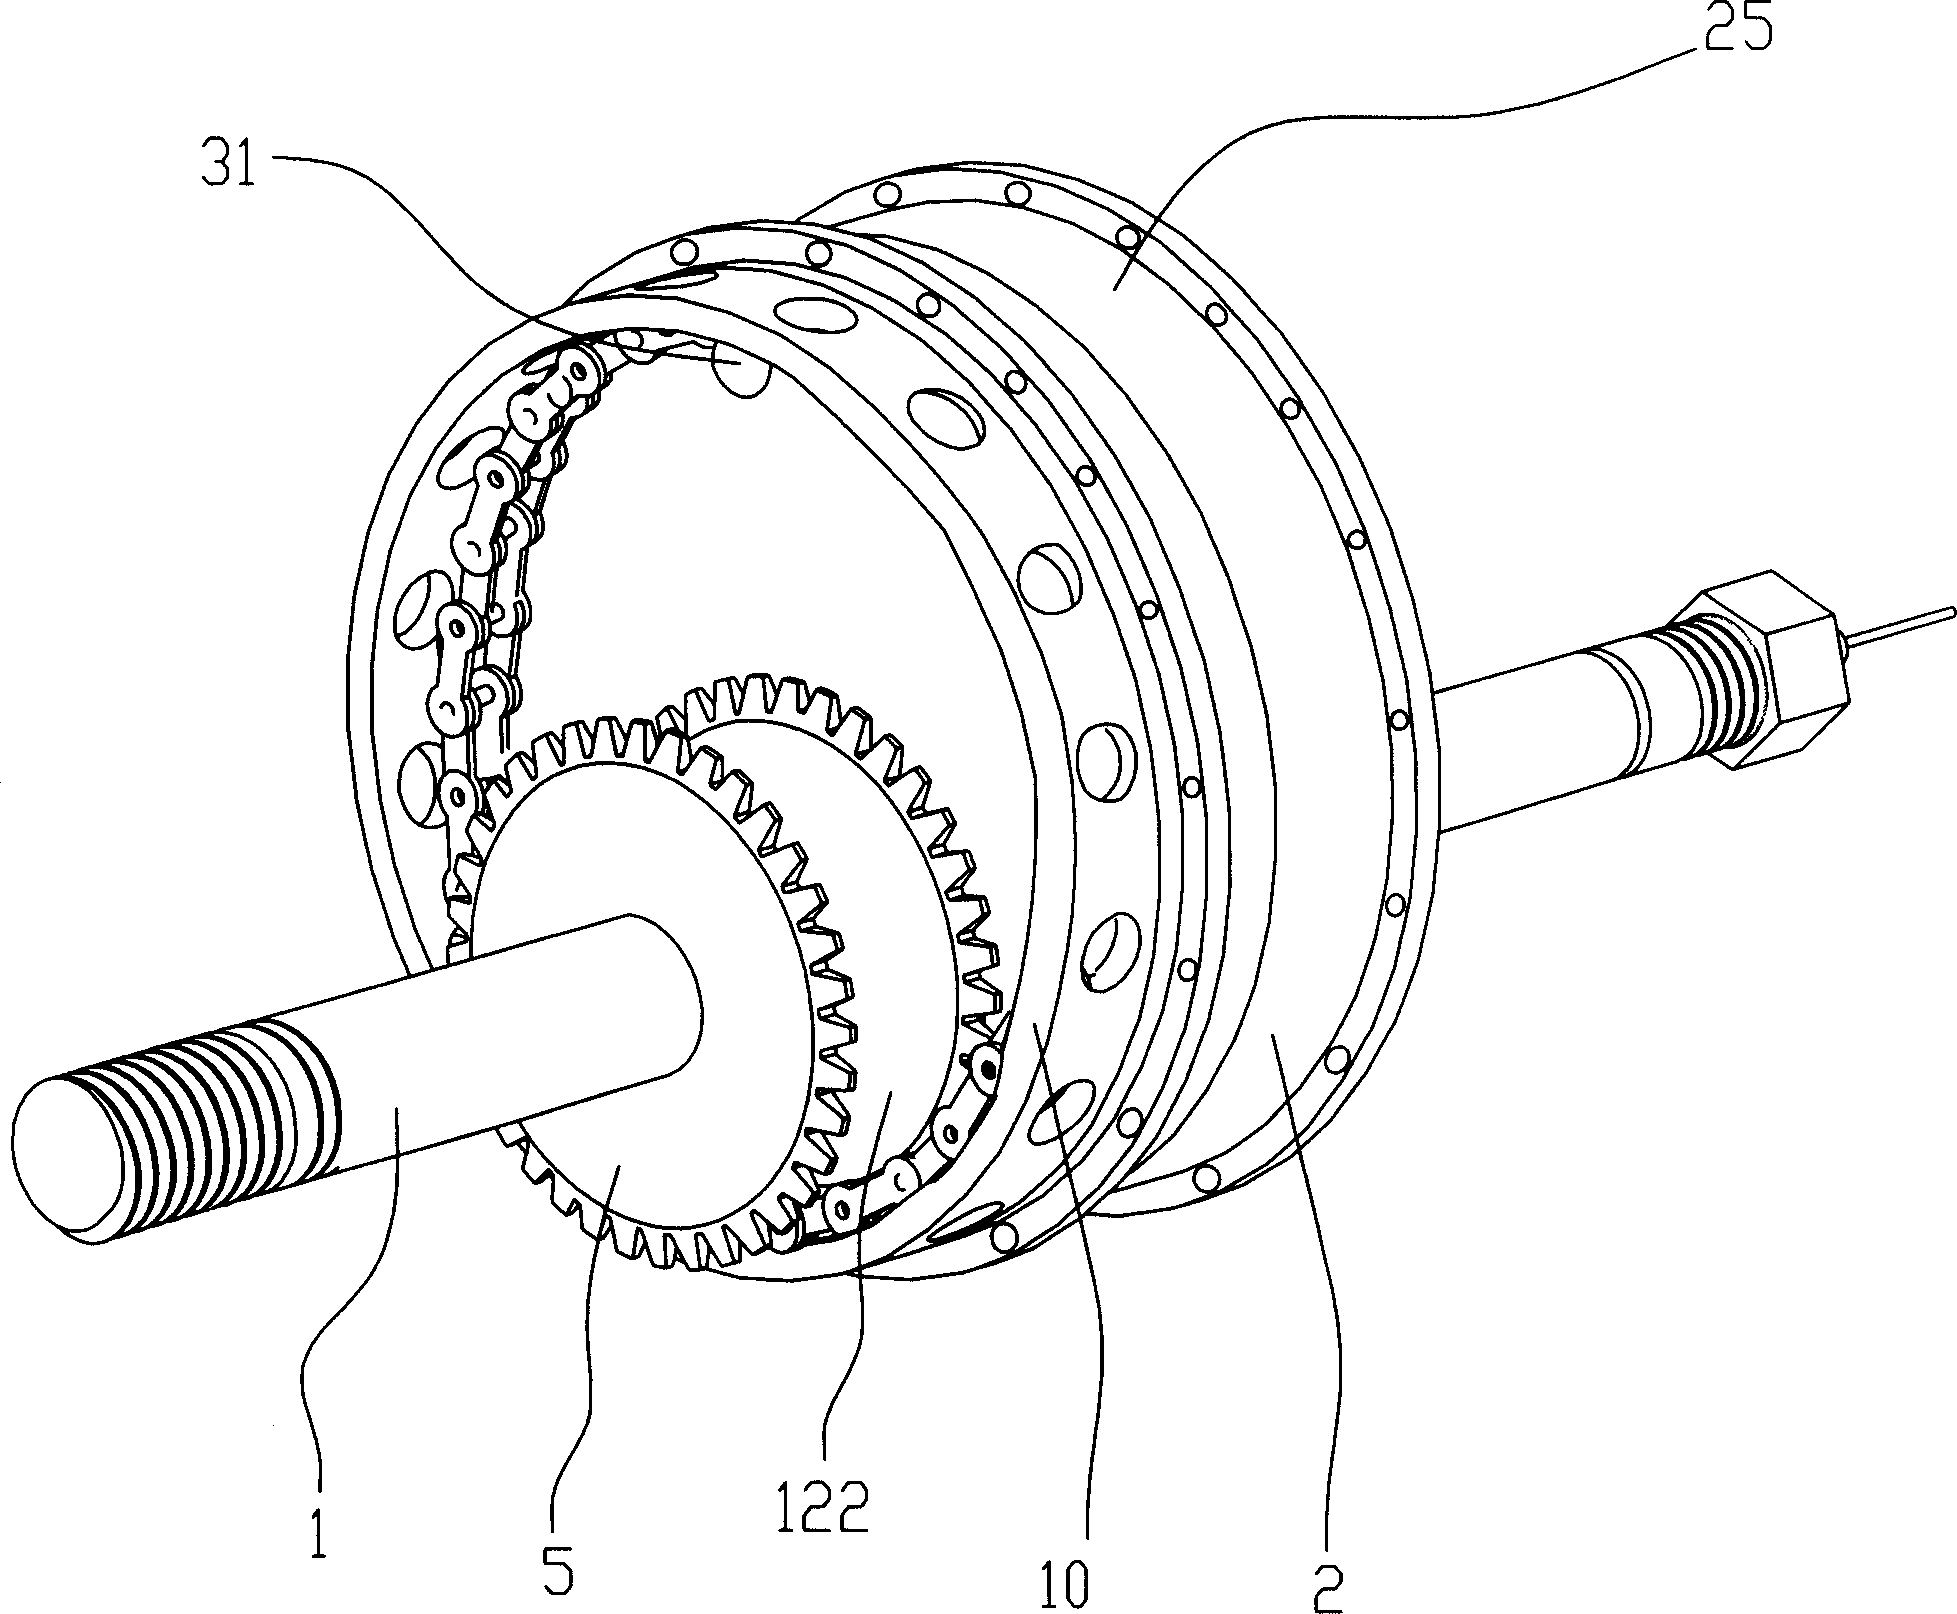 Bicycle with eccentric wheel shaft